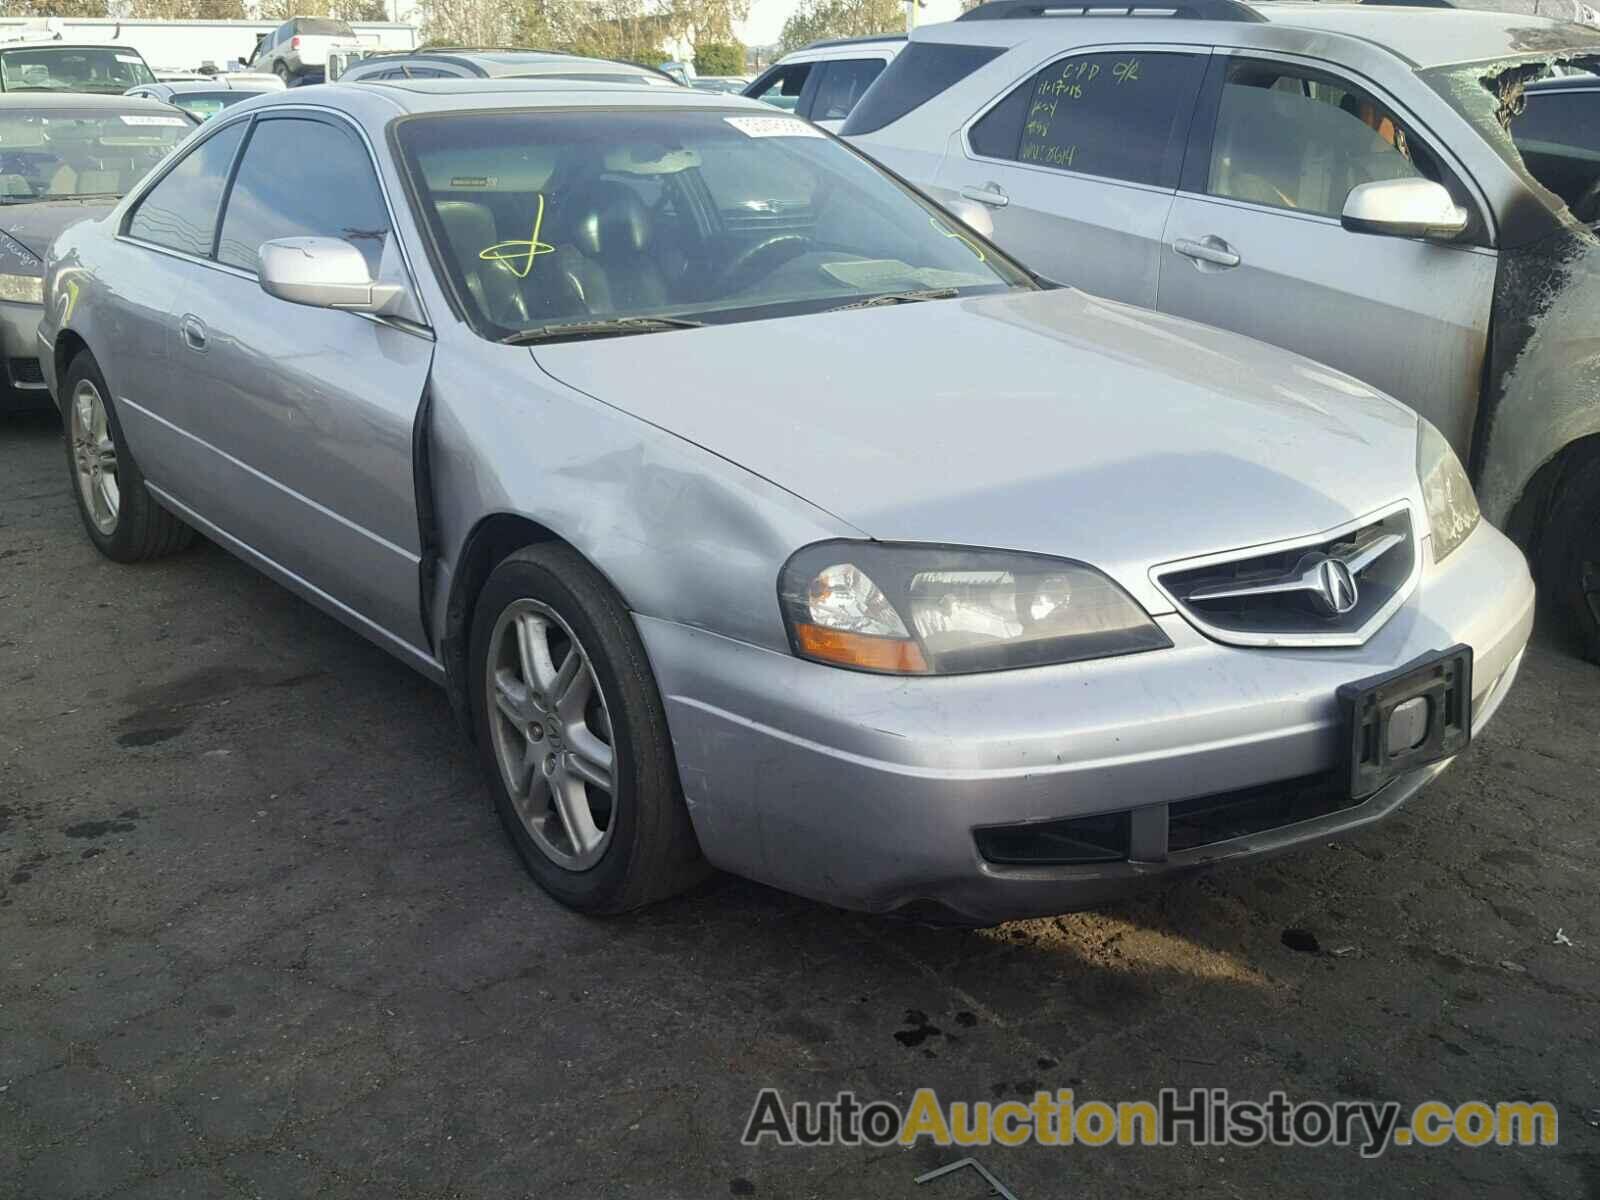 2003 ACURA 3.2CL TYPE-S, 19UYA42783A008896